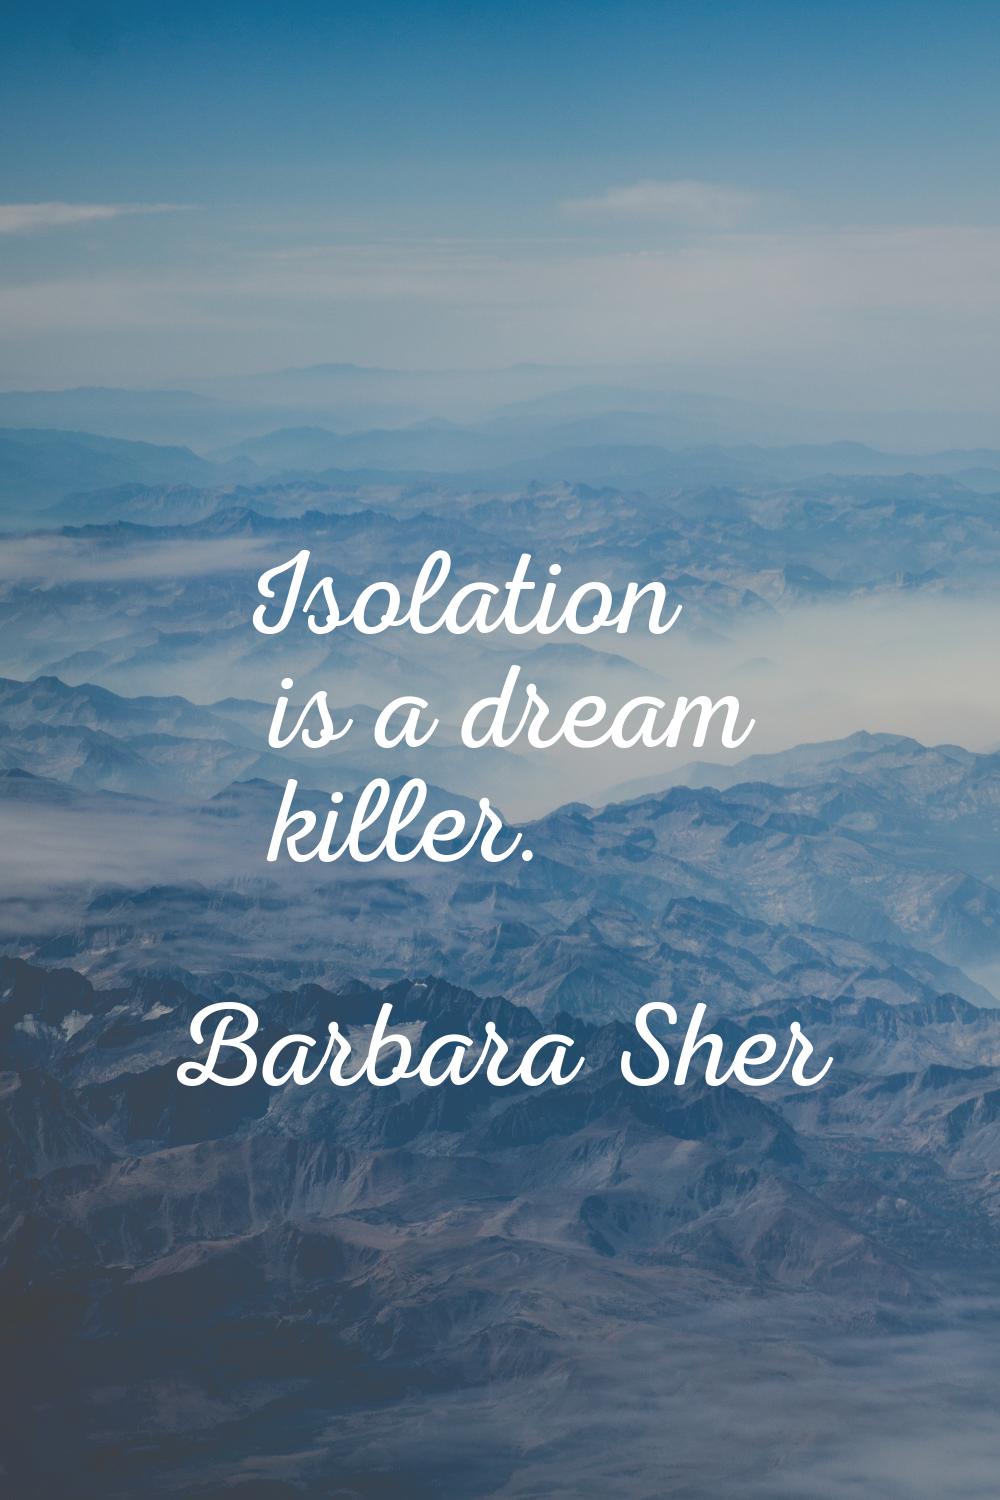 Isolation is a dream killer.